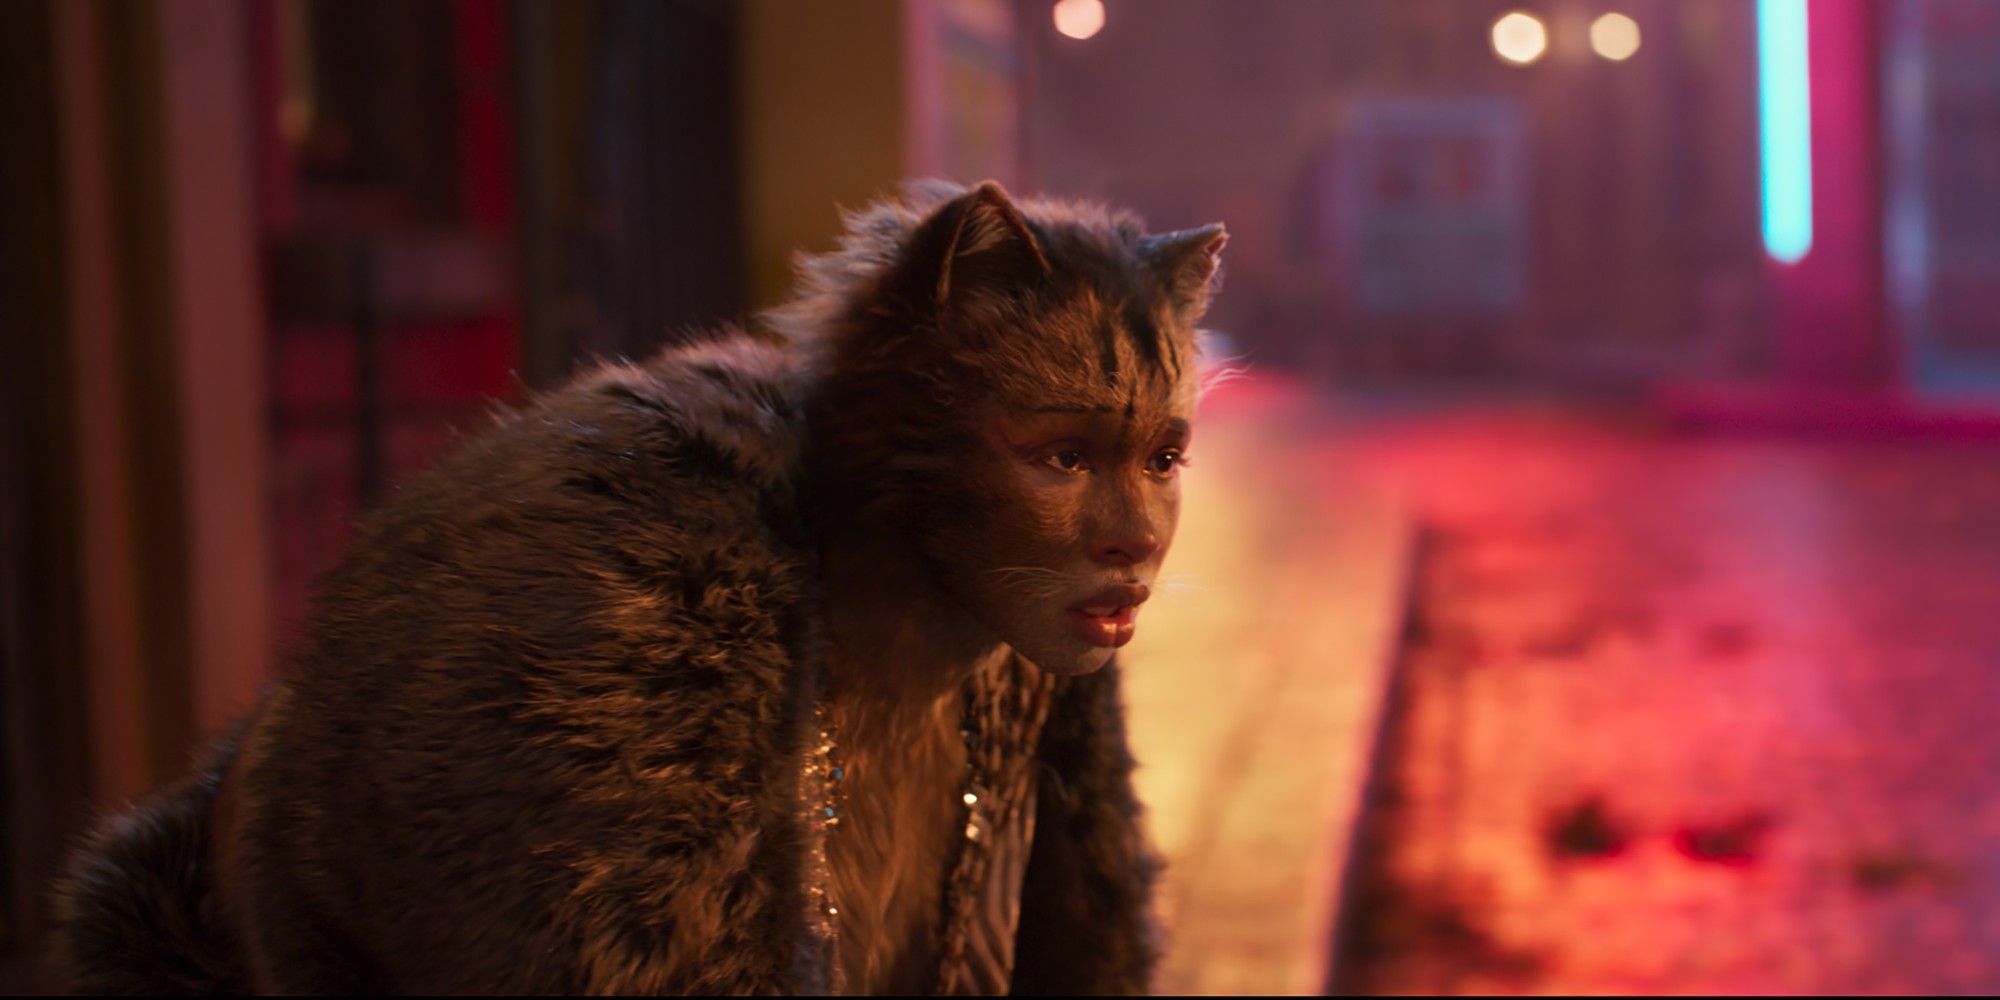 Cats Jennifer Hudson S 5 Best 5 Worst Movies According To Rotten Tomatoes